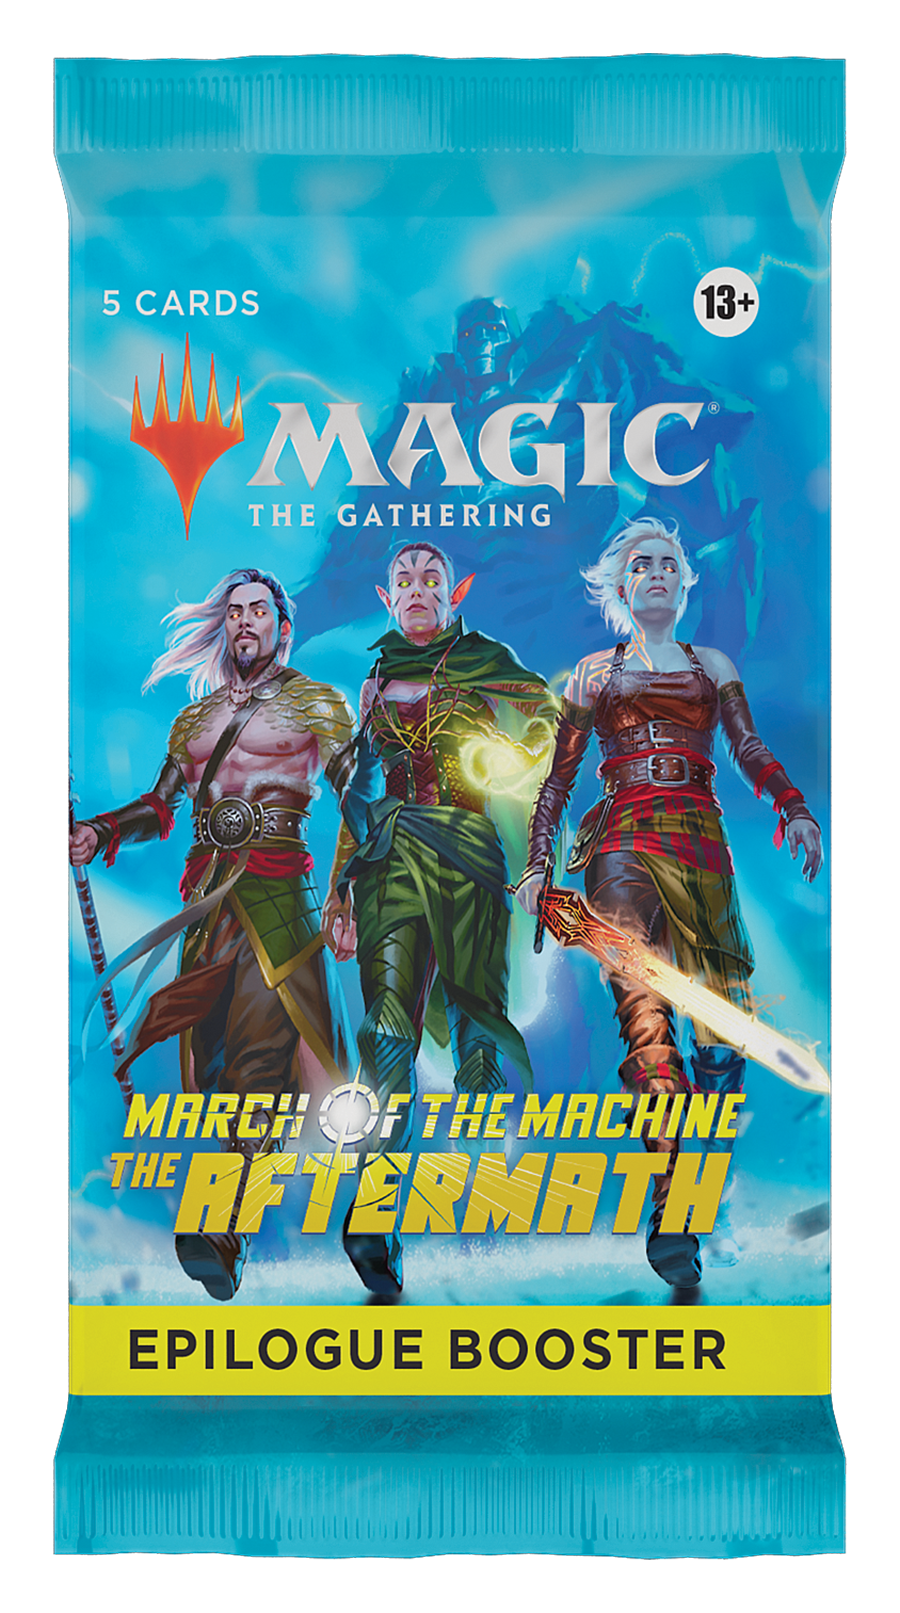 MARCH OF THE MACHINE: THE AFTERMATH EPILOGUE BOOSTER PACK